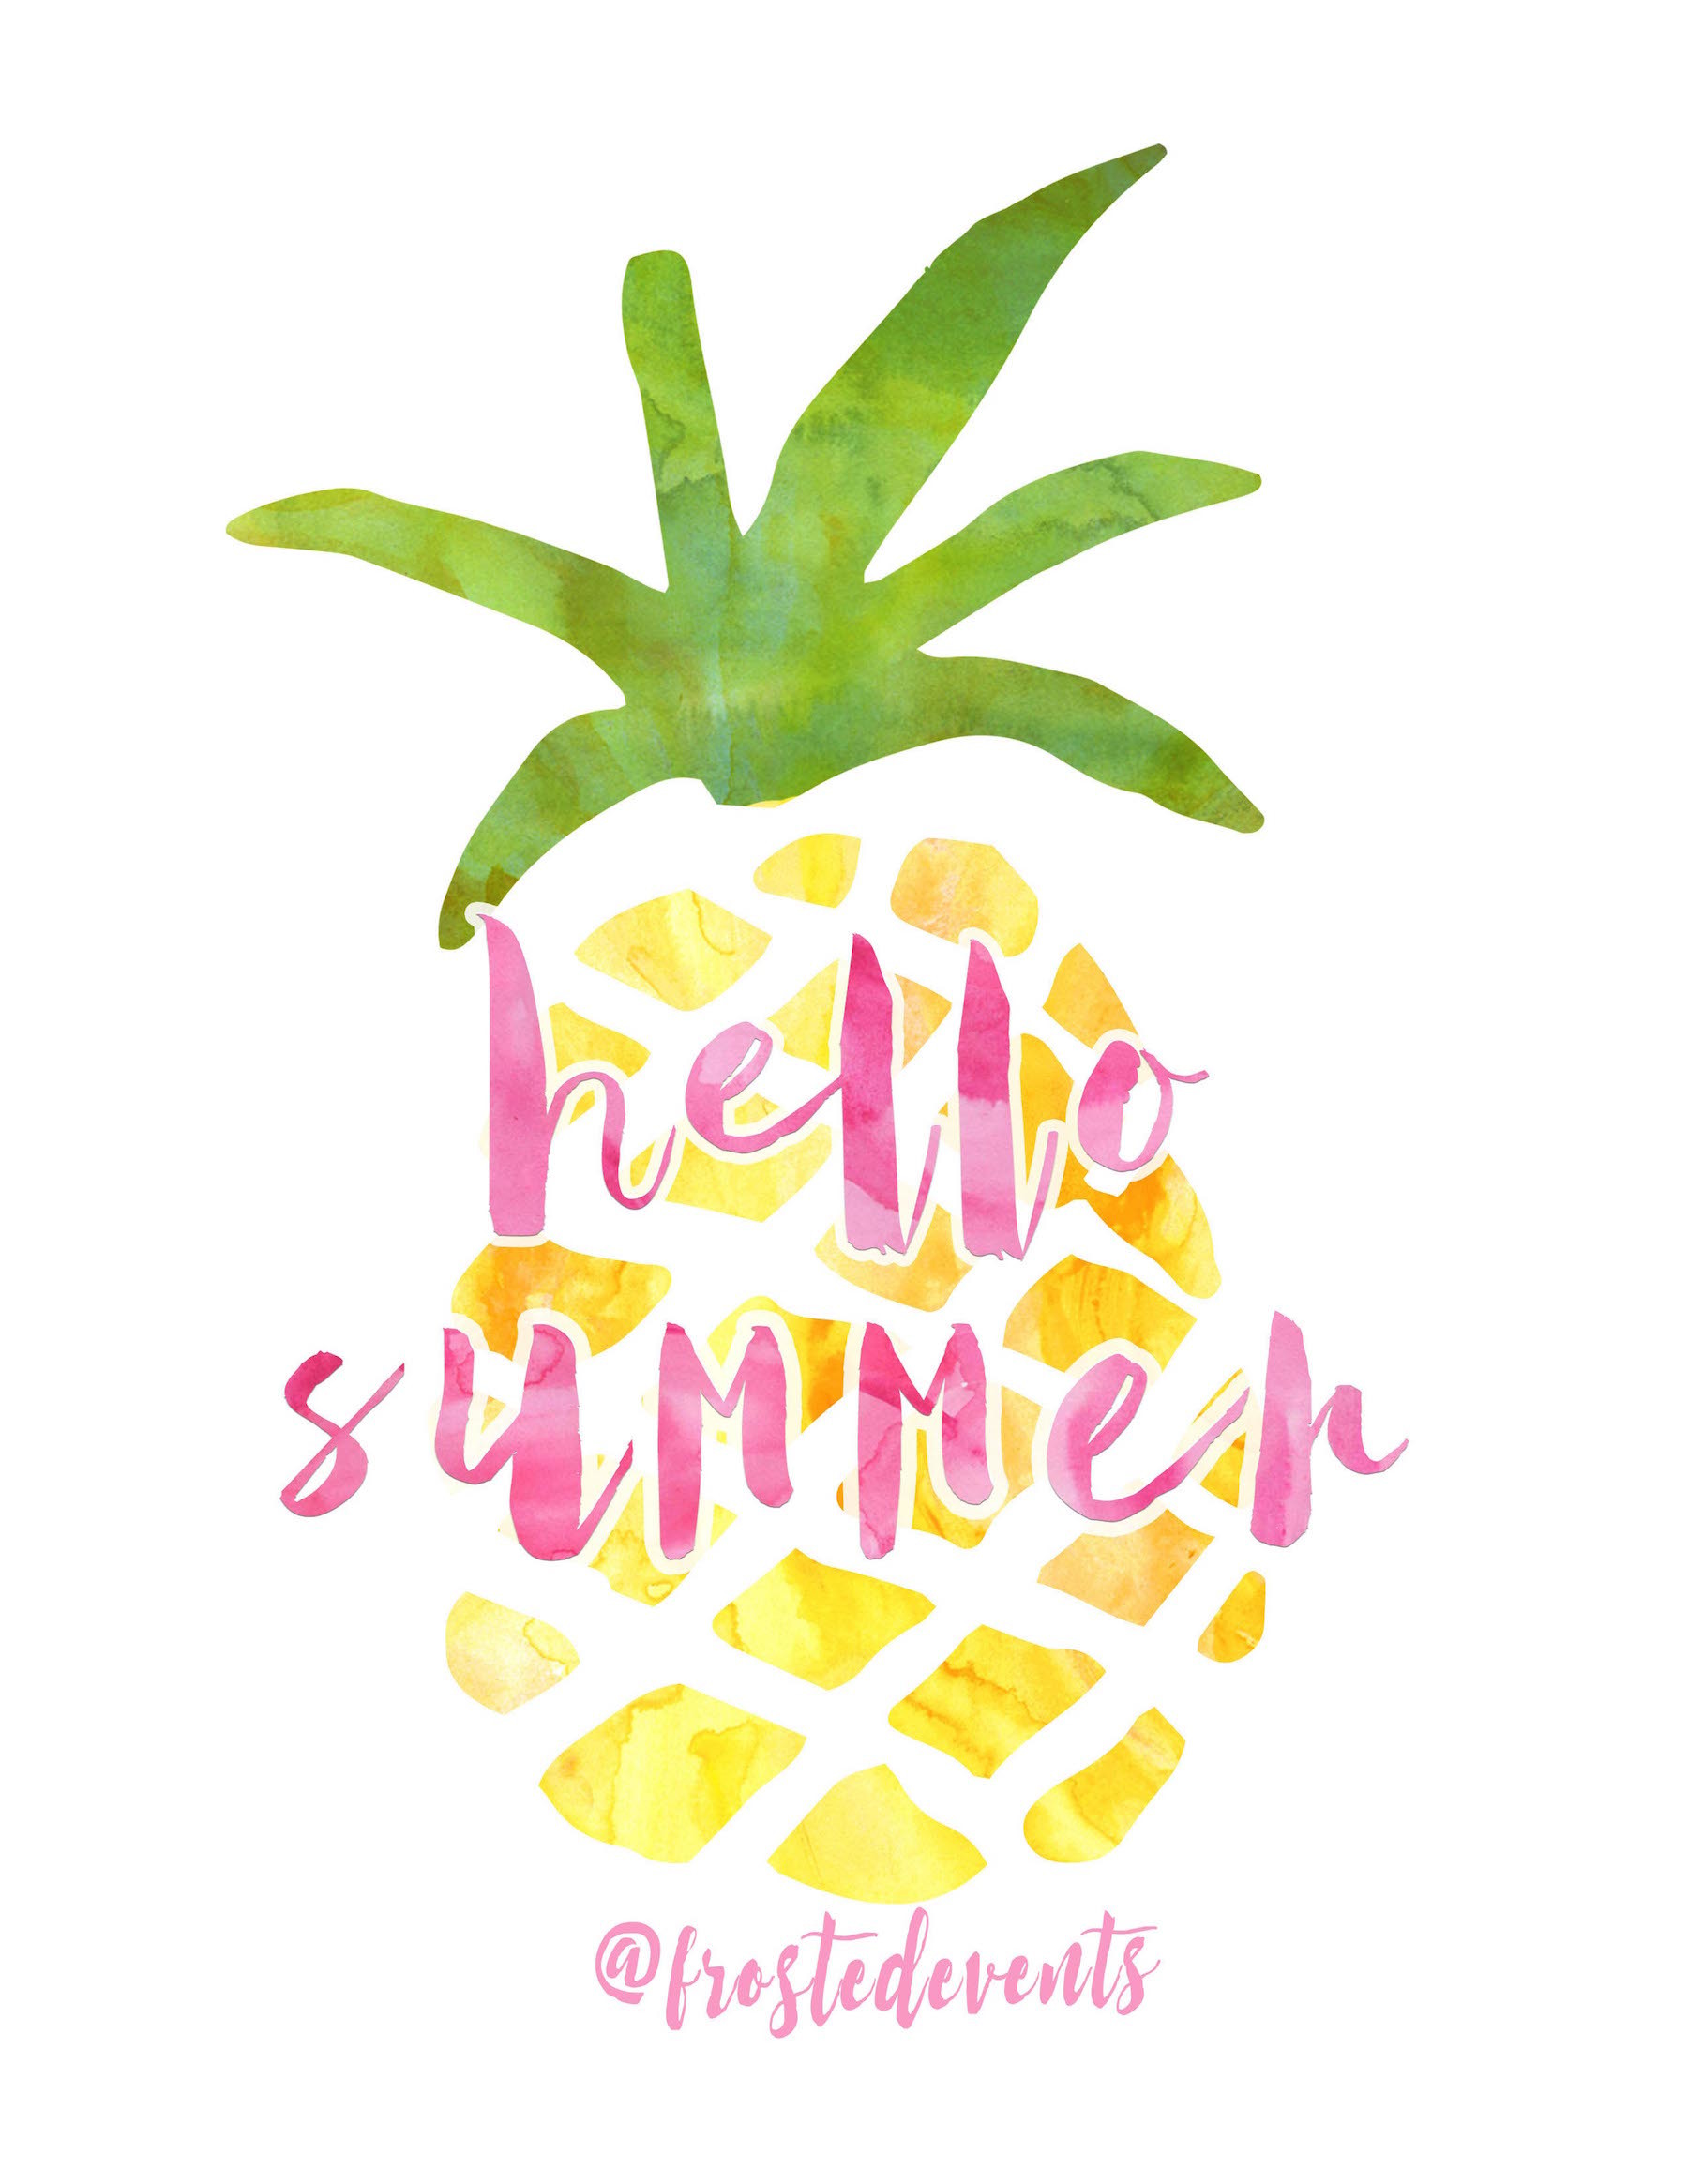 Free Pineapple Print Hello Summer Pineapple Watercolor Printable from frostedevents.com frostedevents